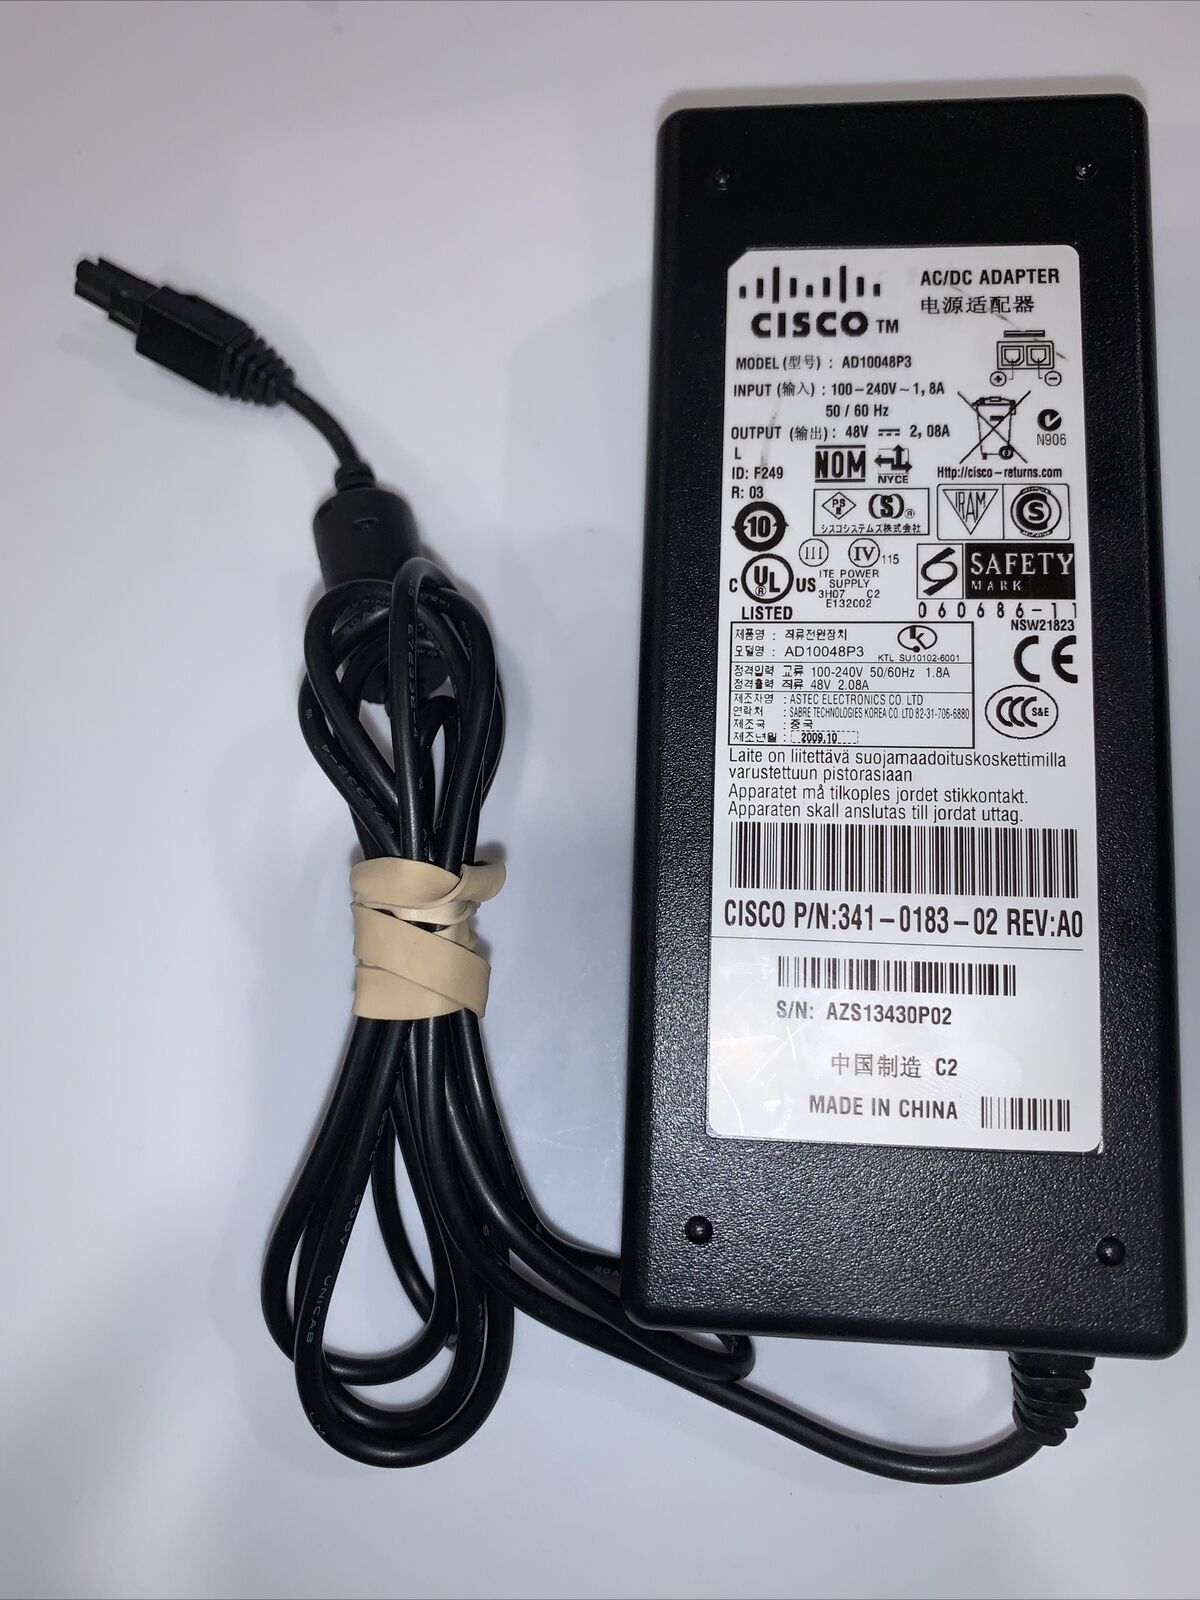 OEM CISCO 48V 2.08A 2-PIN POWER SUPPLY ADAPTER 341-0183-02 AD10048P3 TESTED-WORK Connectors: 2 Pin Compatible Brand: